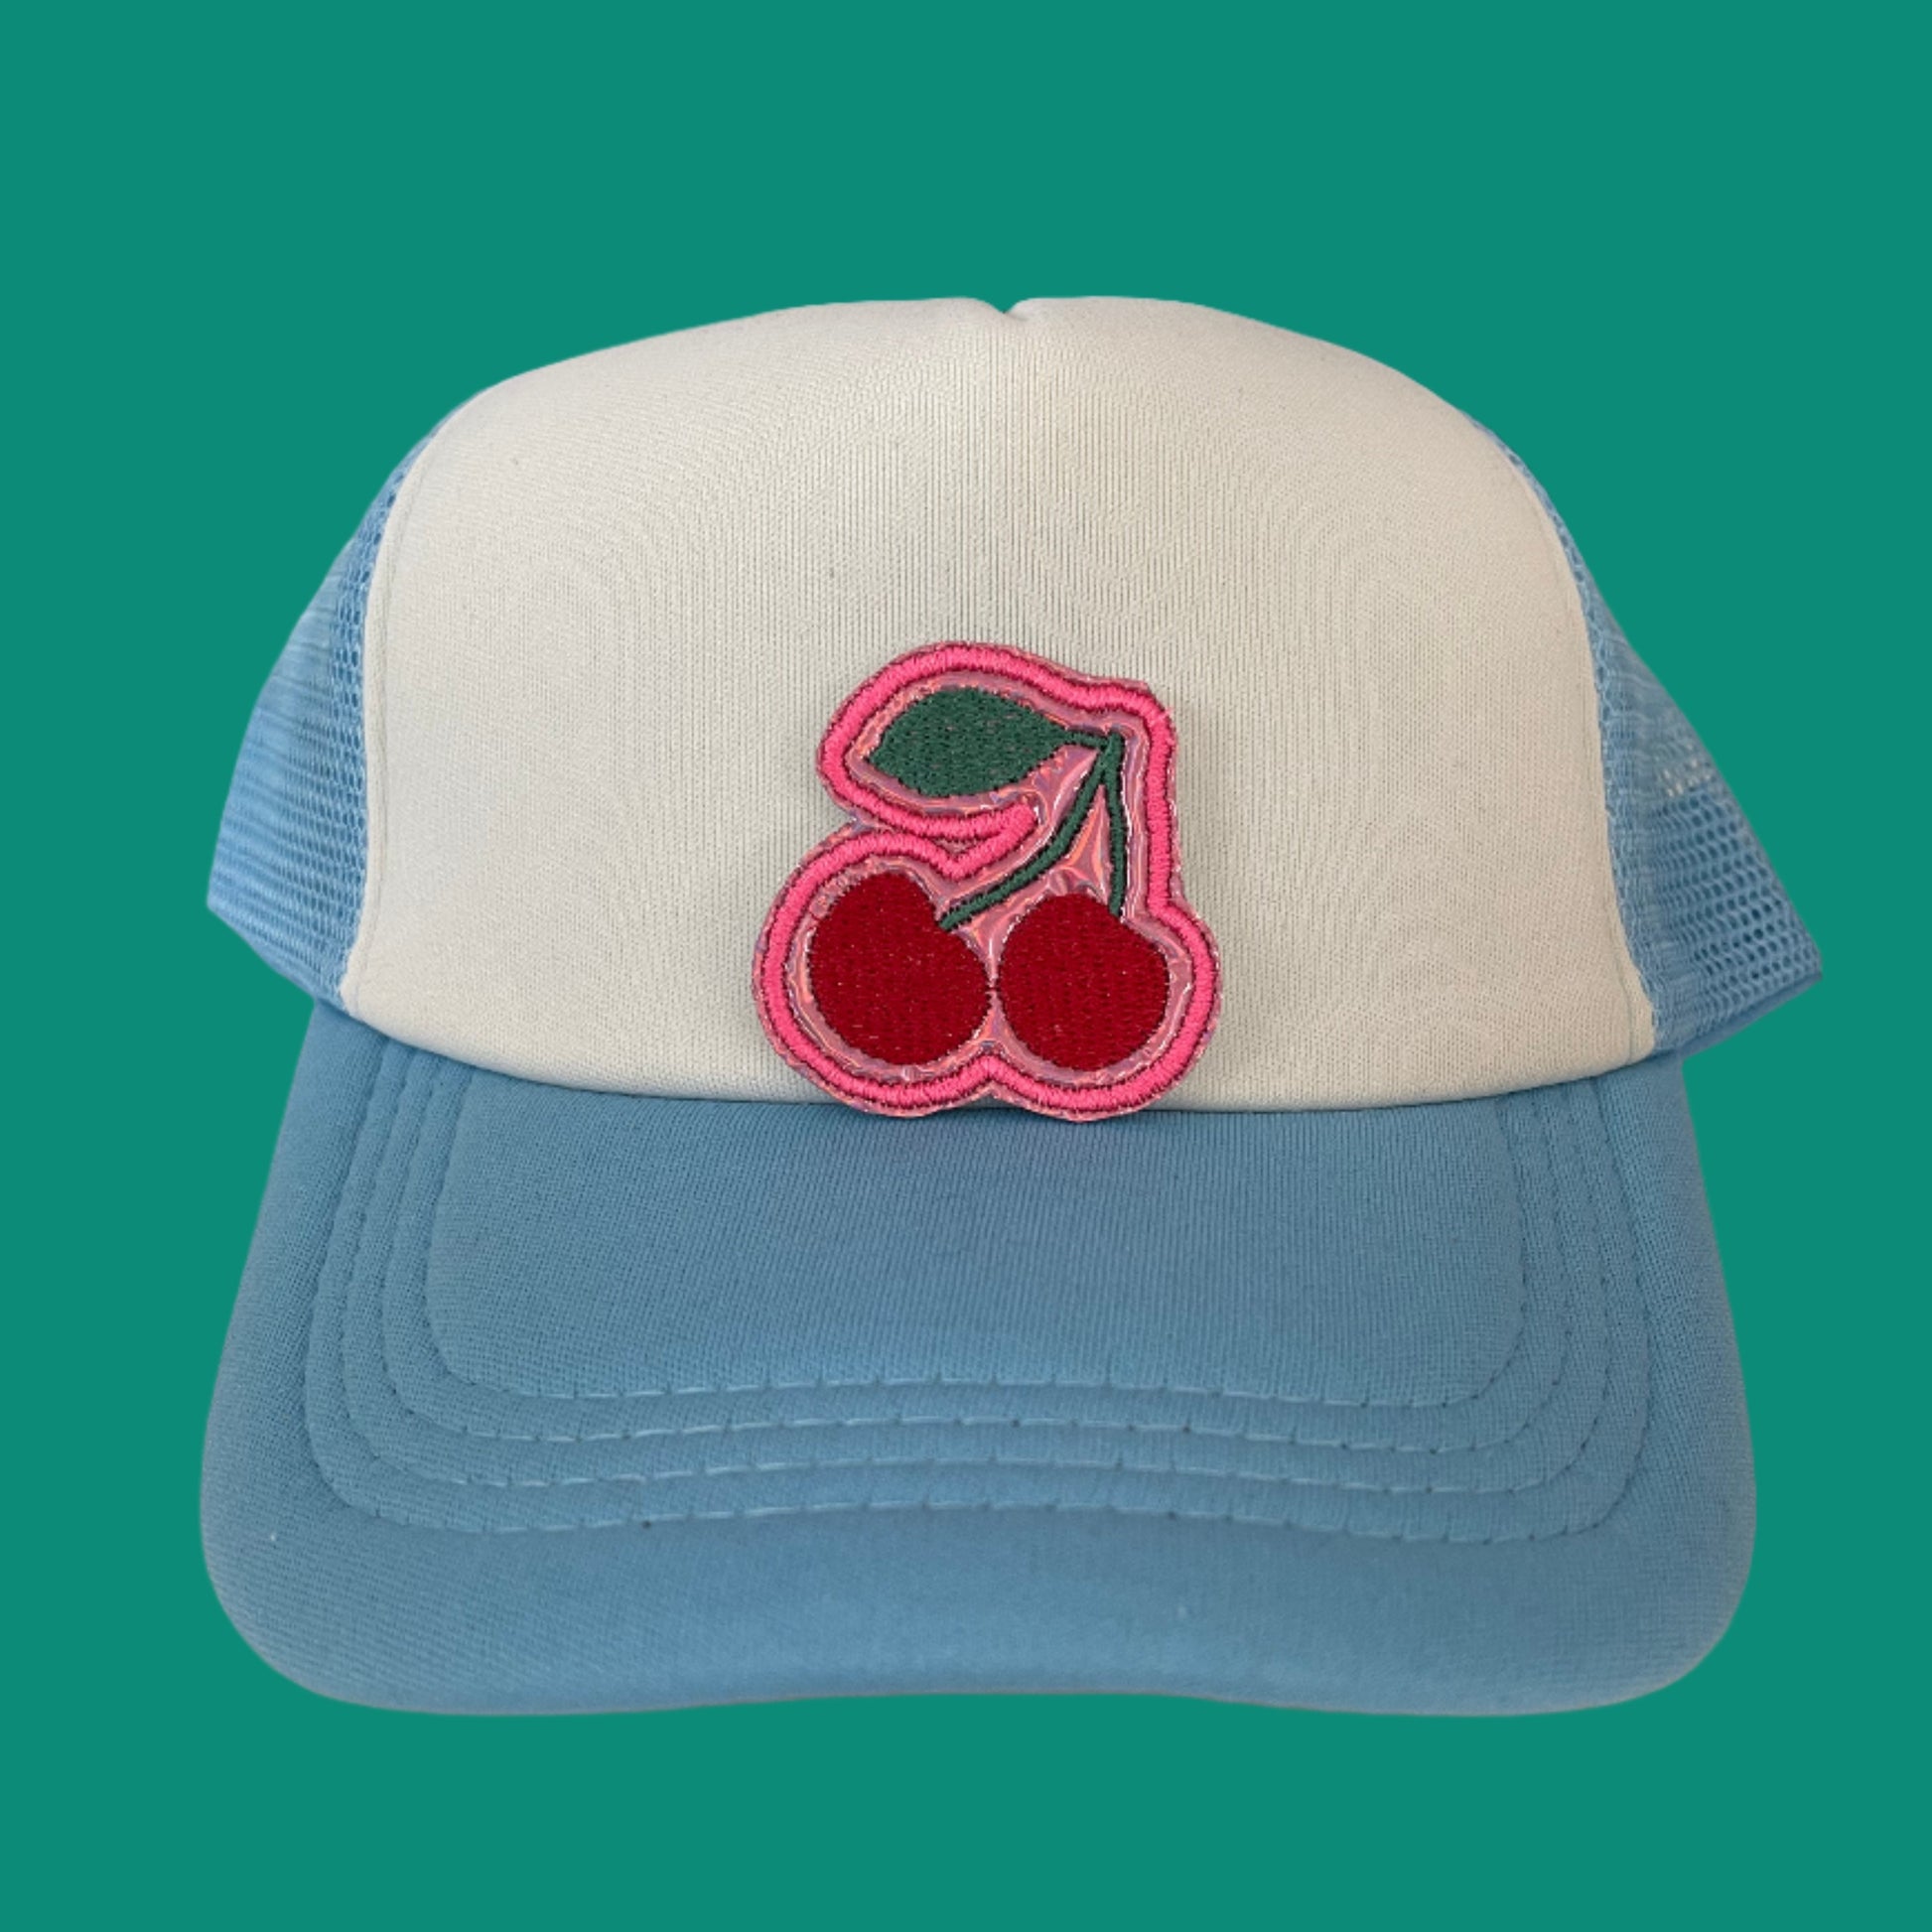 Close-up of a cherry embroidered patch with red and pink detailing, perfect for customizing hats and other accessories.